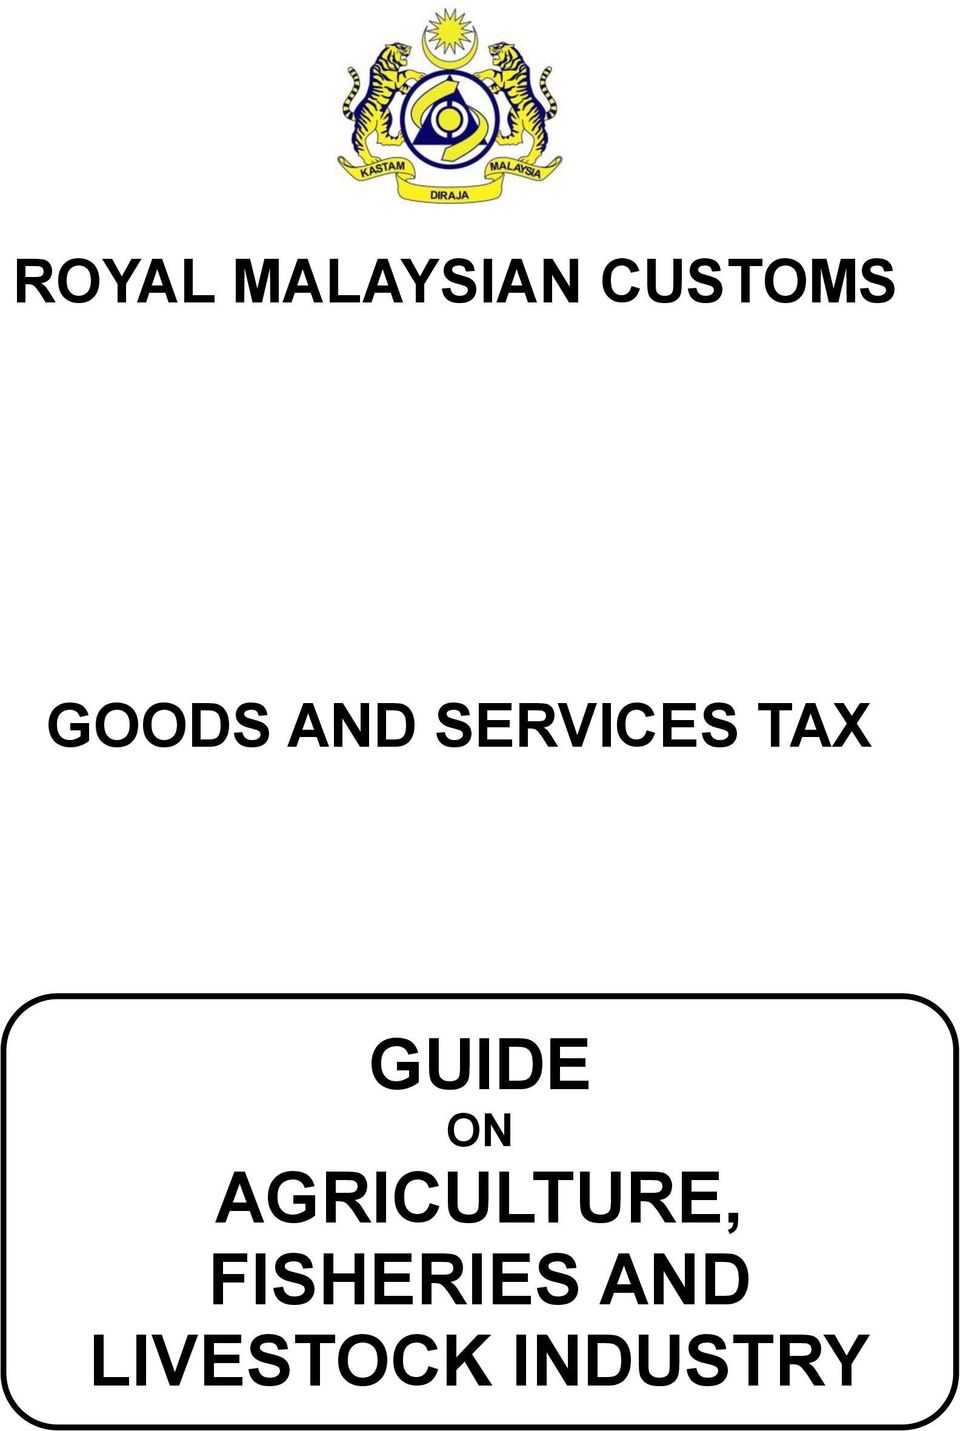 SERVICES TAX GUIDE ON